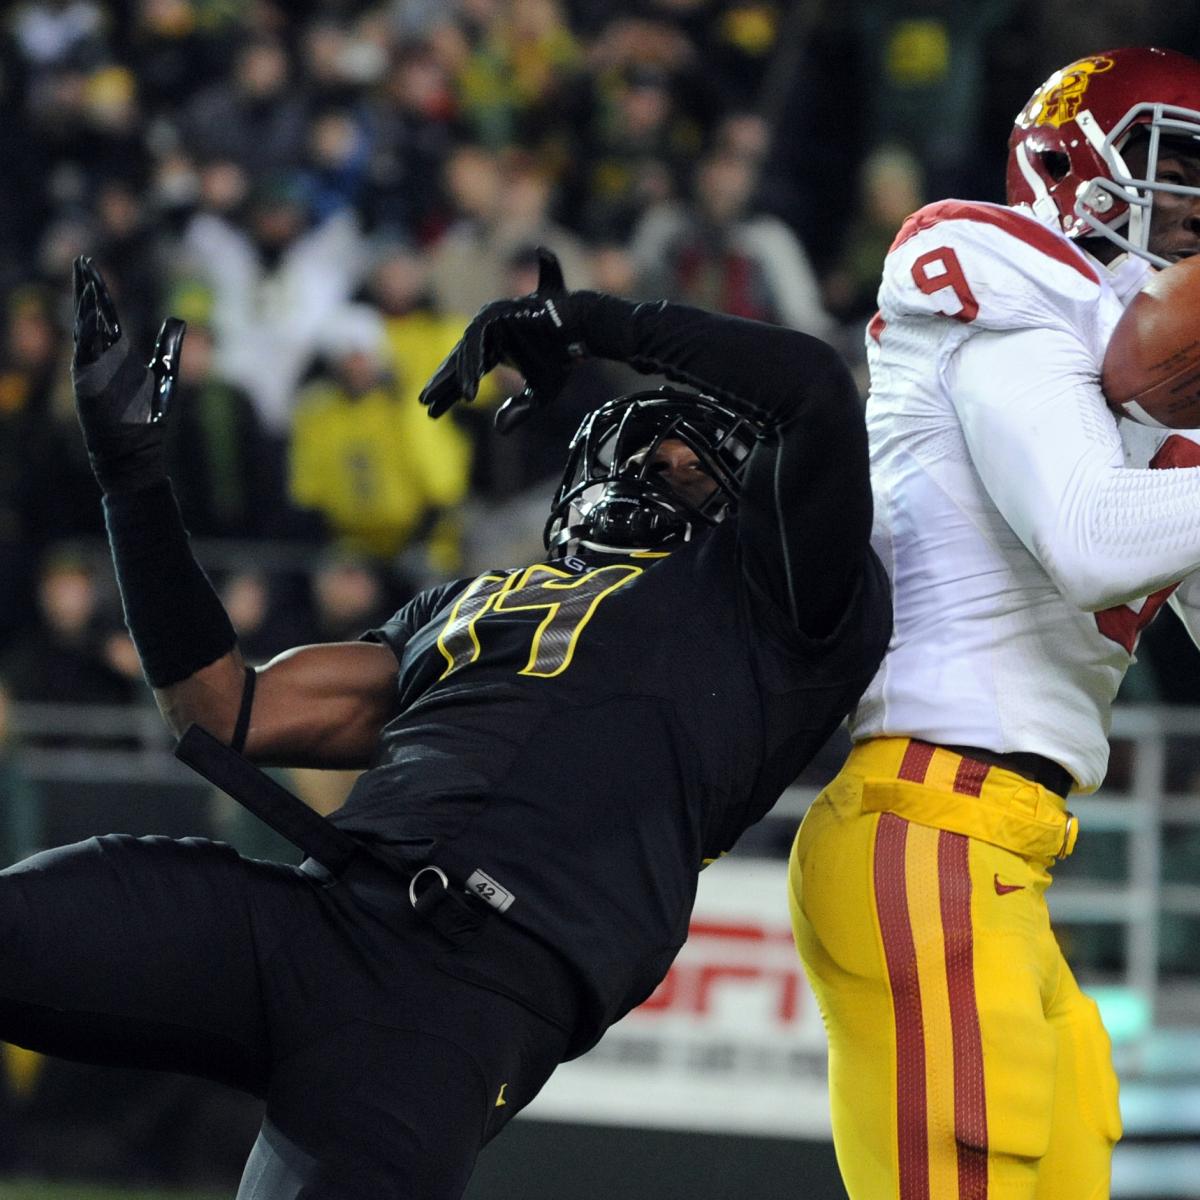 College Football Playoff SoS Not Fair to USC or Schools with Hard